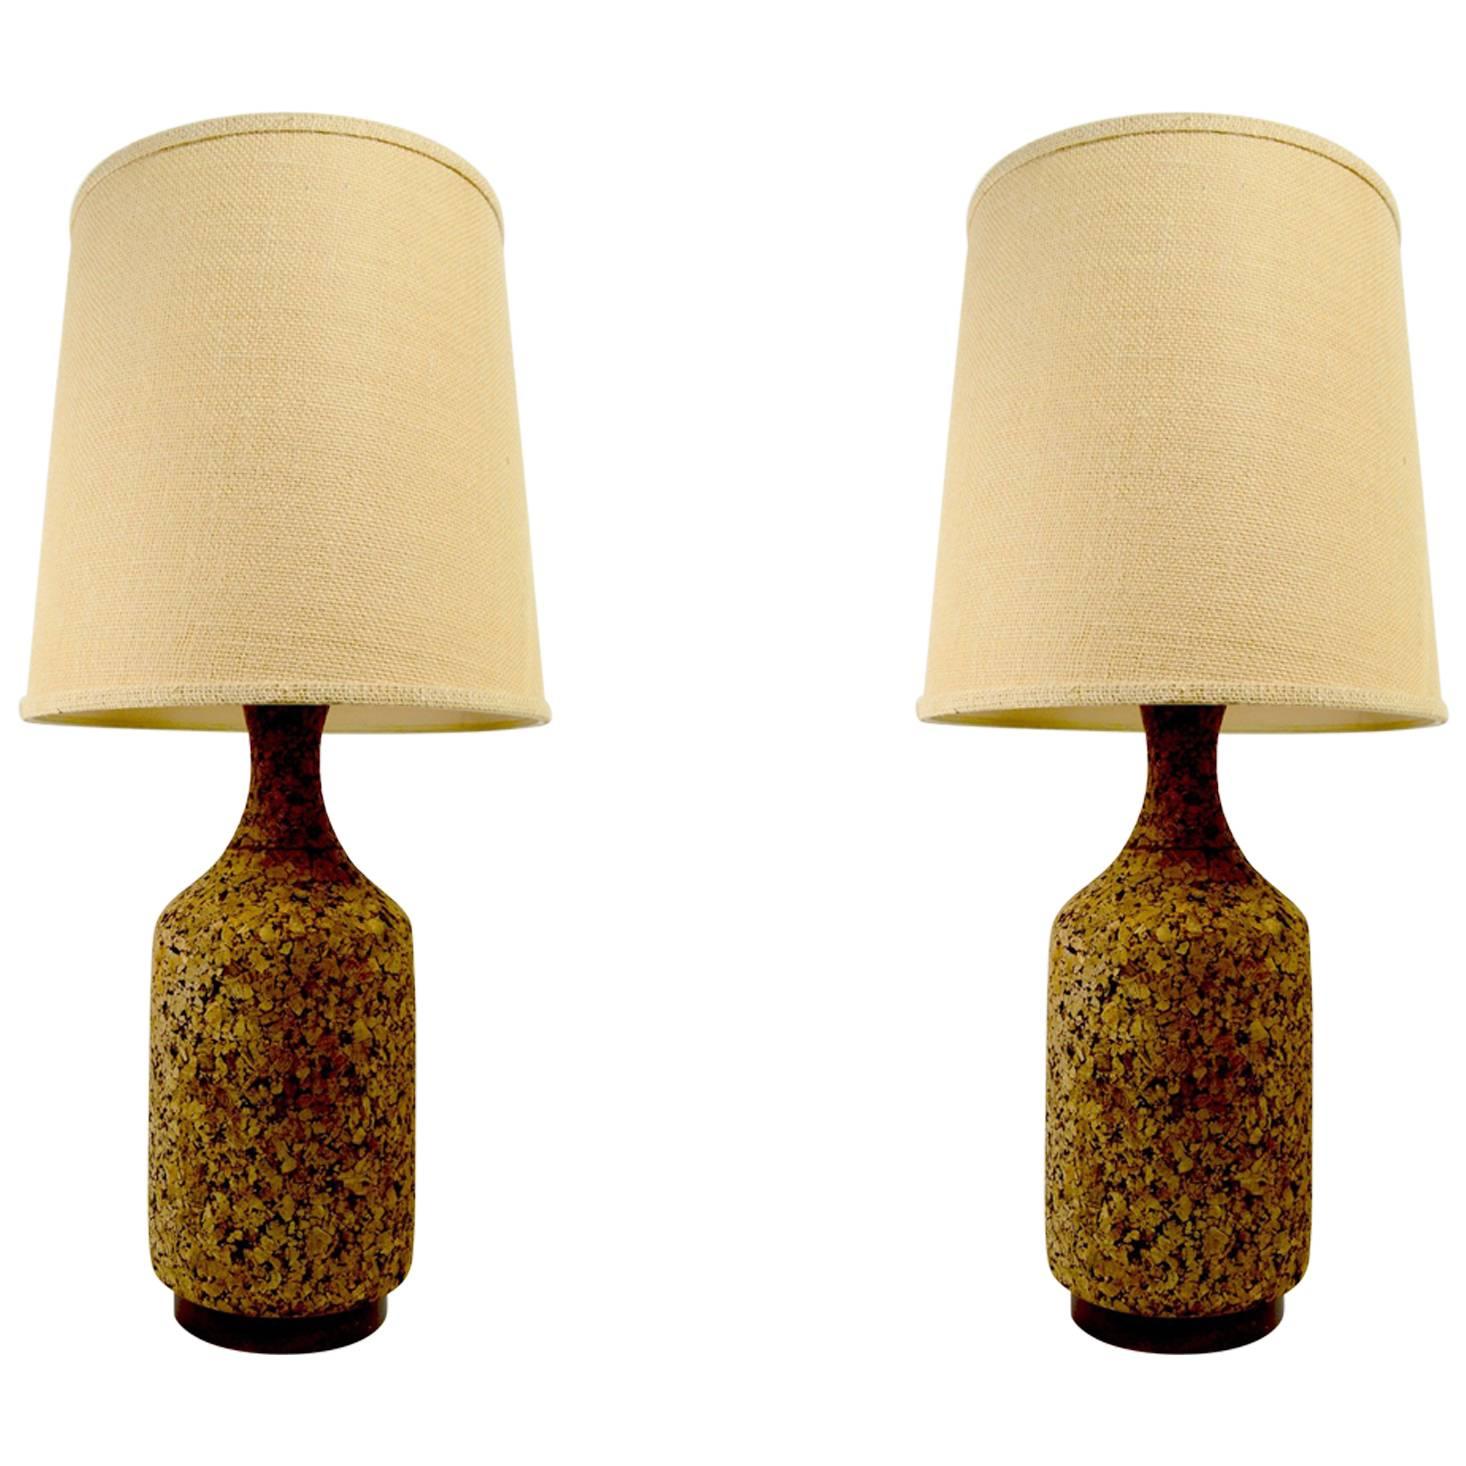 Pair of Cork and Wood Table Lamps